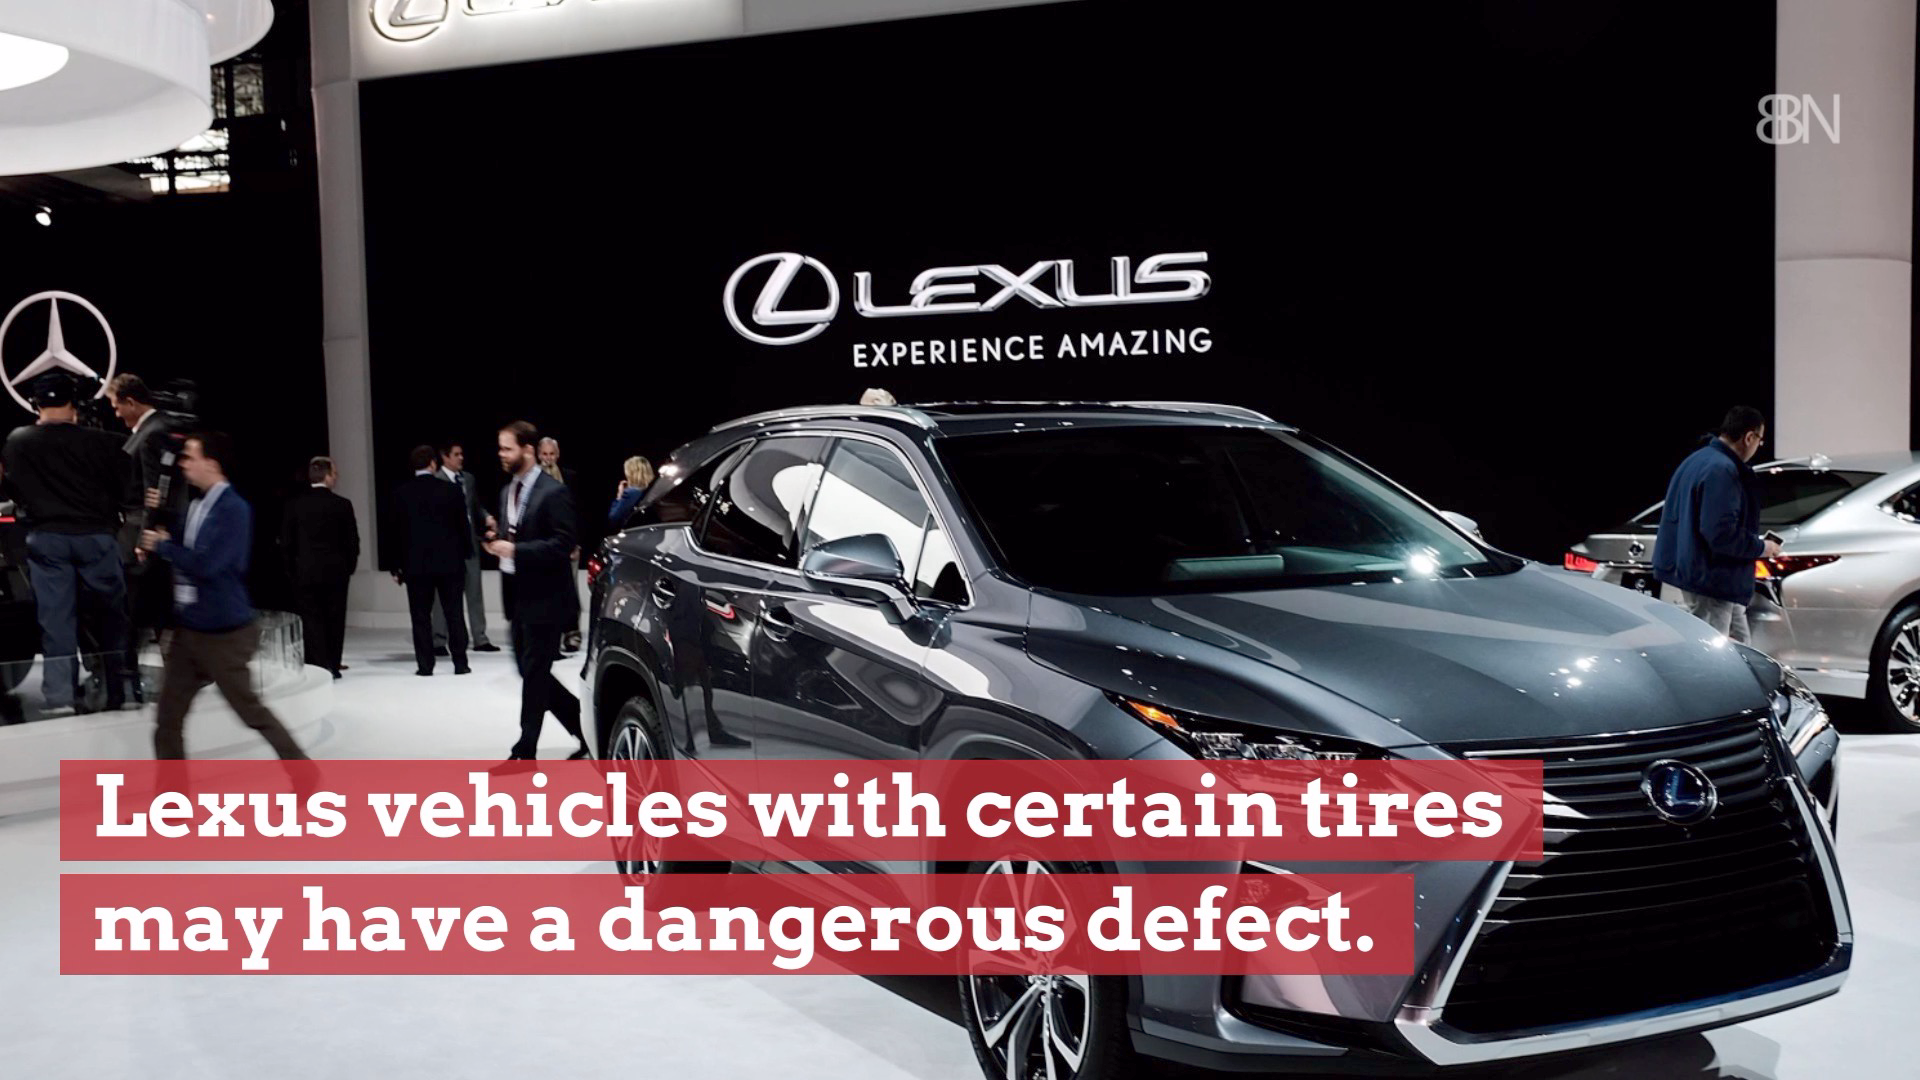 Beware: Your Lexus Vehicle Could Have A Serious Defect